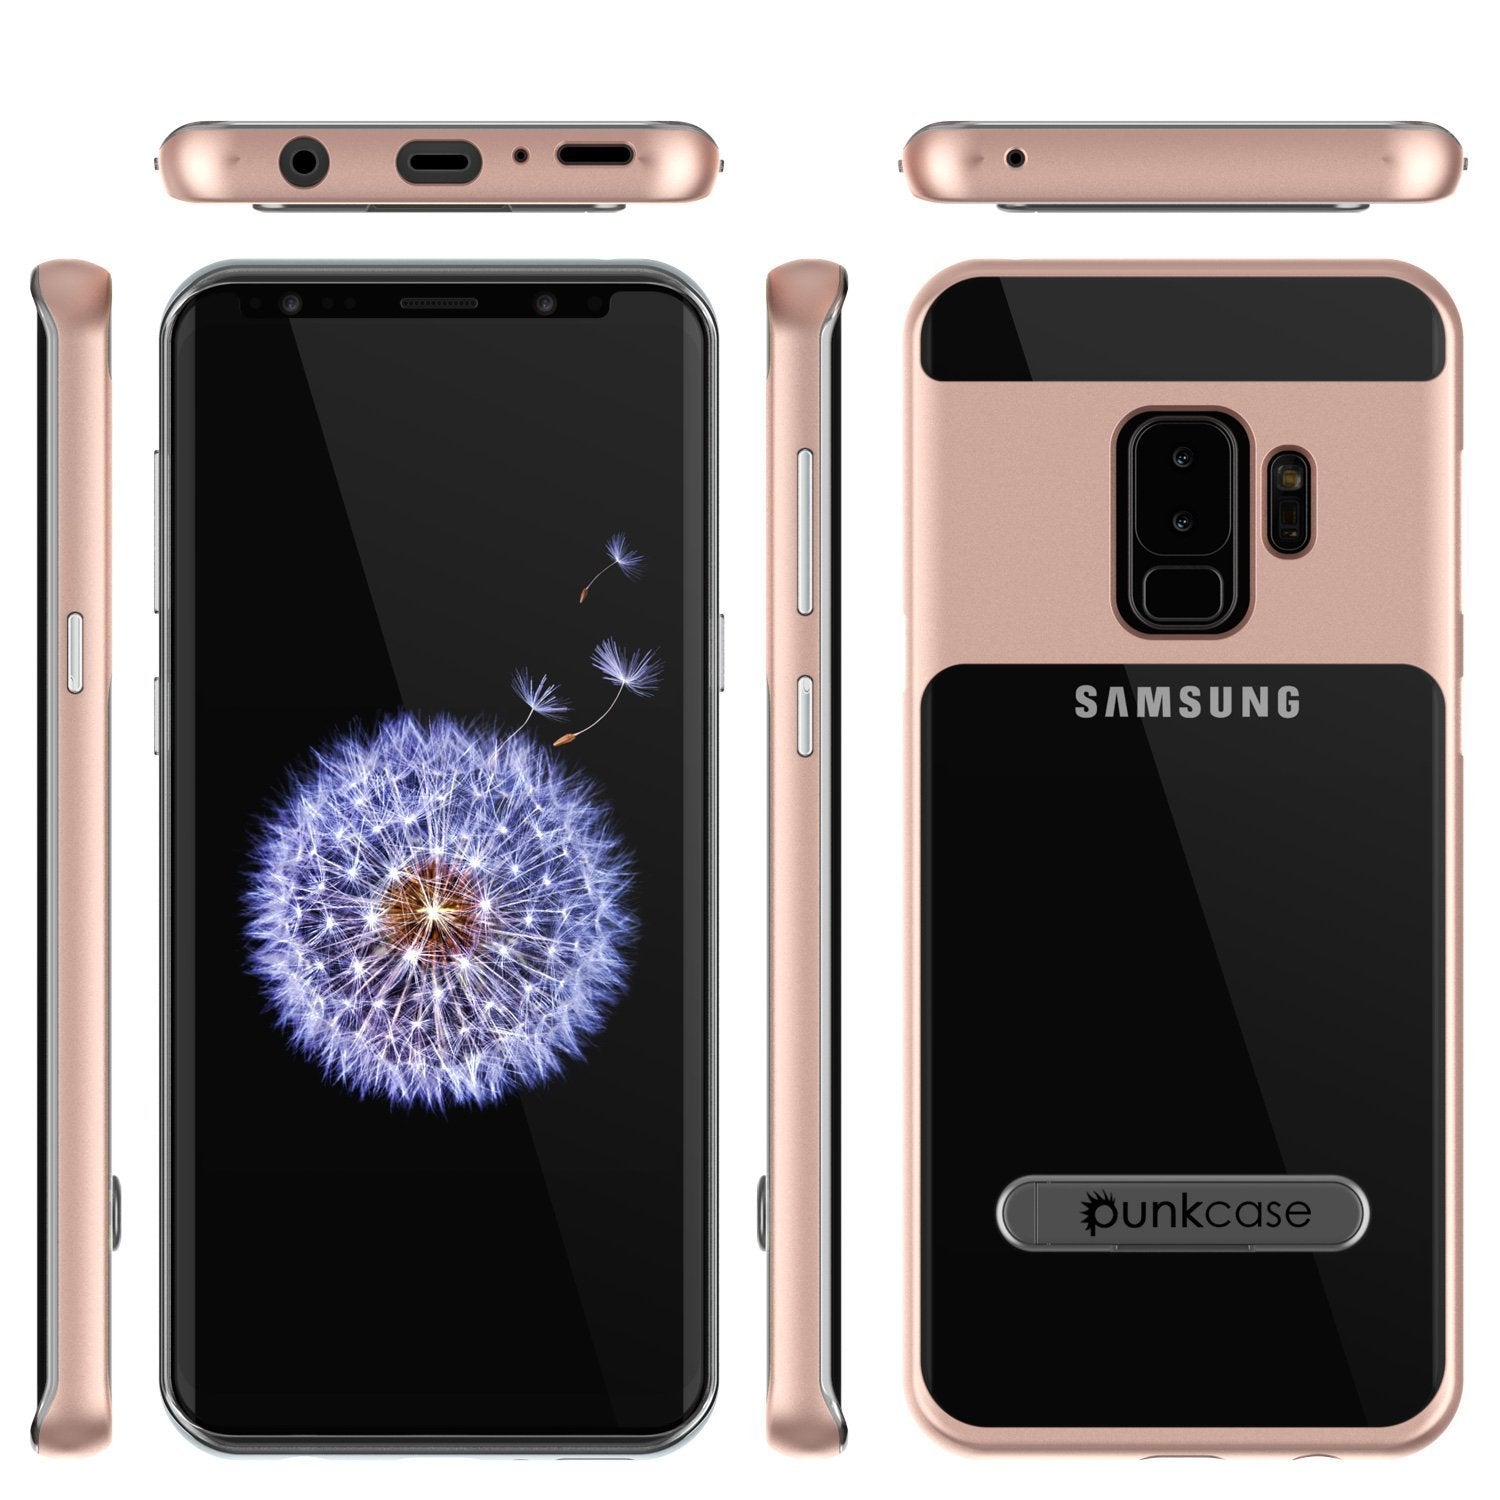 Galaxy S9+ Plus Case, PUNKcase [LUCID 3.0 Series] [Slim Fit] [Clear Back] Armor Cover w/ Integrated Kickstand, Anti-Shock System & PUNKSHIELD Screen Protector for Samsung Galaxy S9+ Plus [Rose Gold] - PunkCase NZ